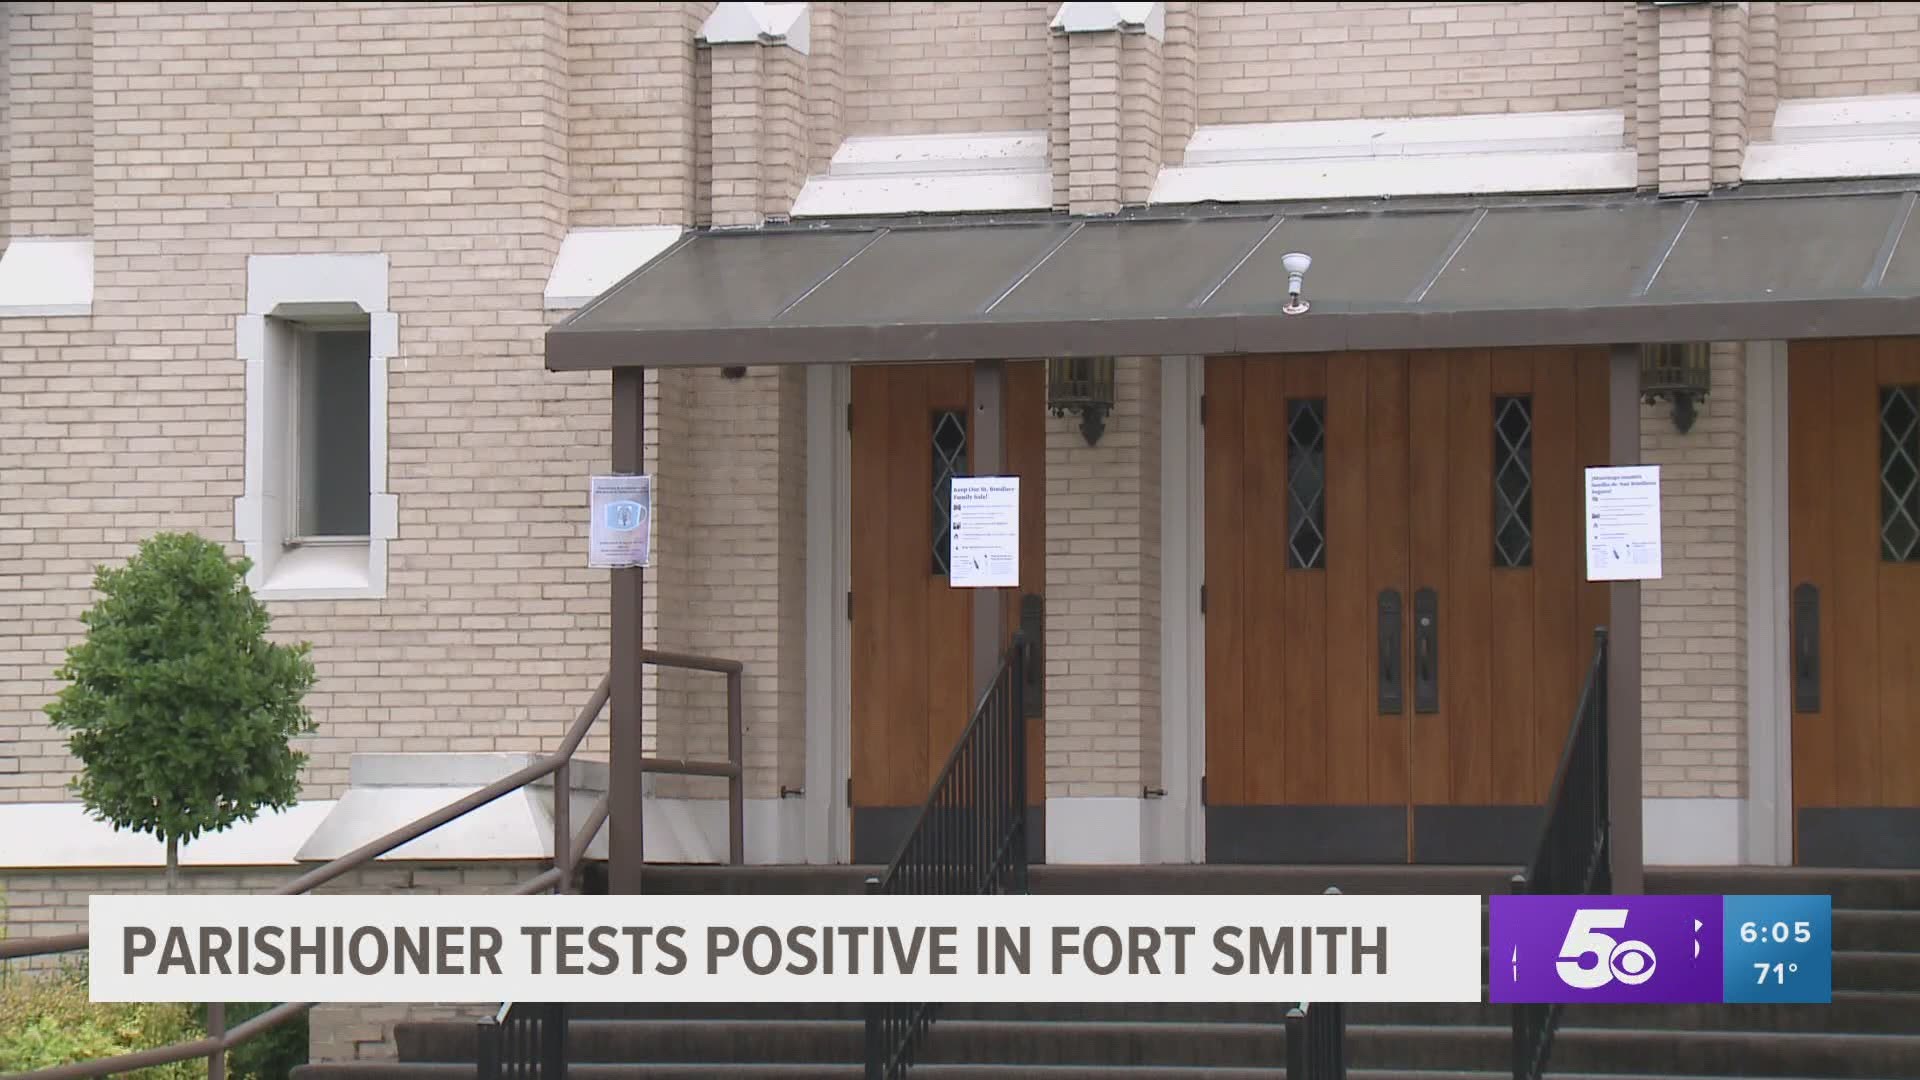 Parishioner tests positive for COVID-19 in Fort Smith